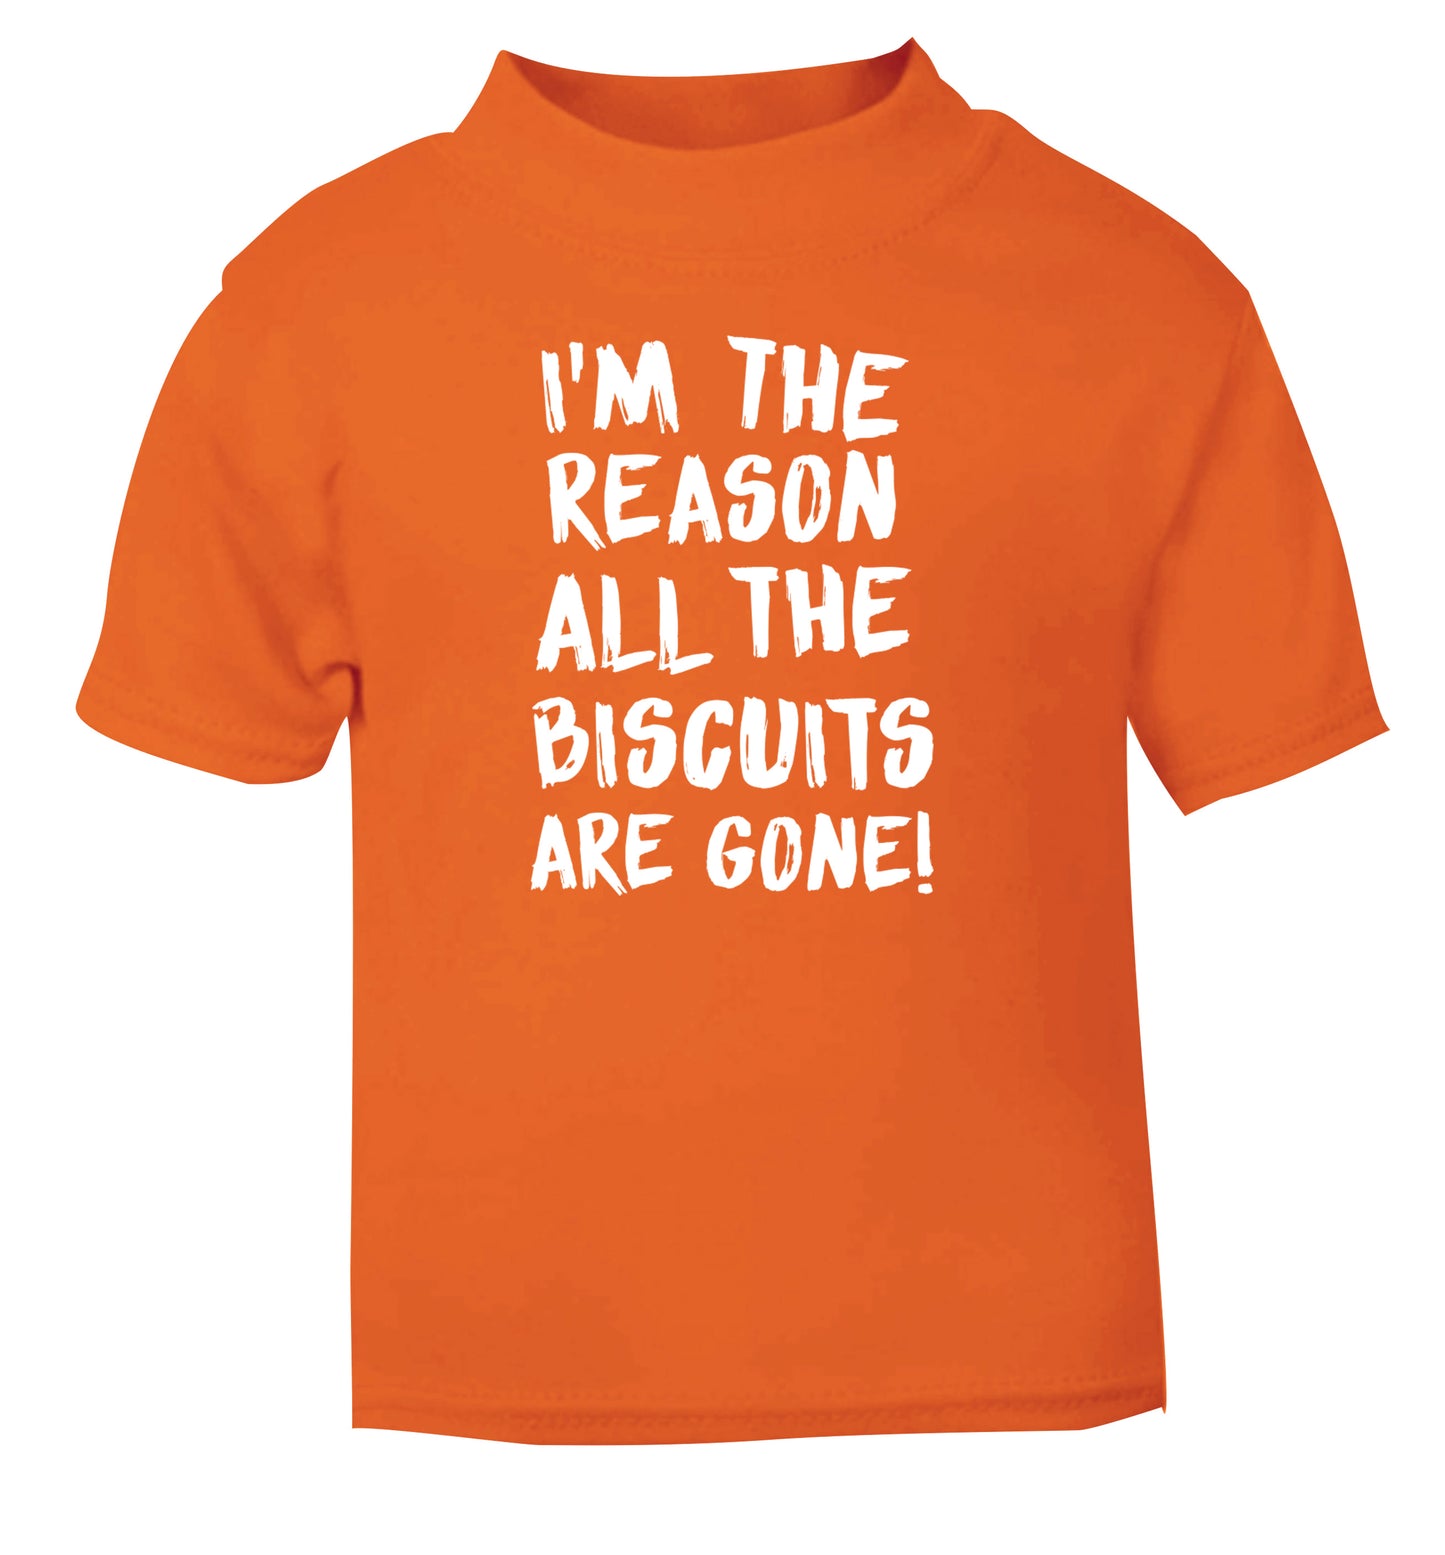 I'm the reason why all the biscuits are gone orange Baby Toddler Tshirt 2 Years